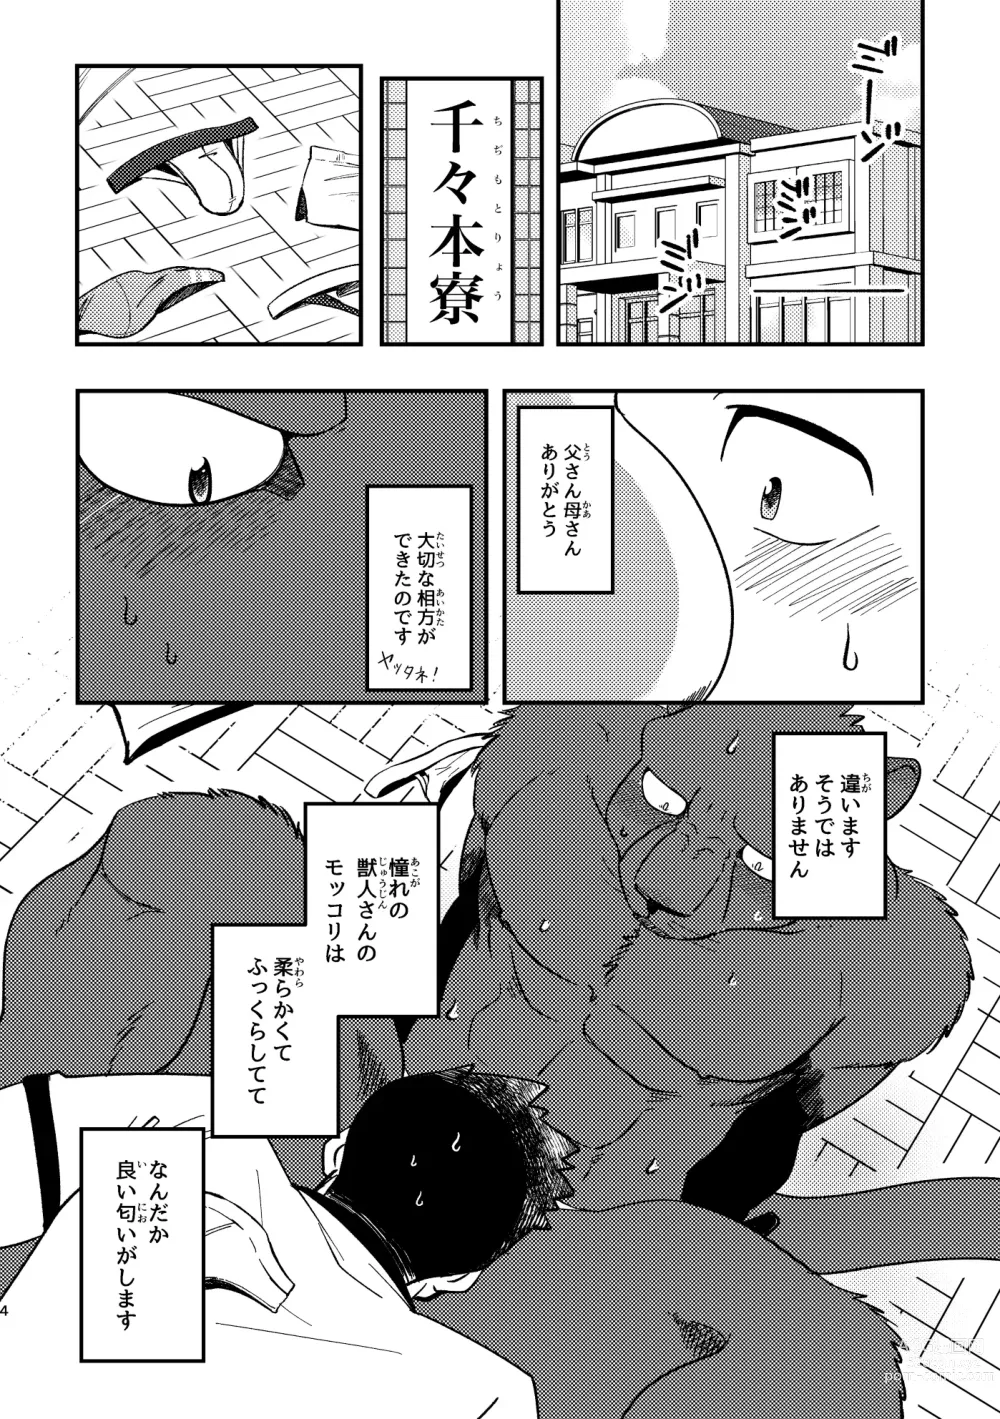 Page 4 of doujinshi Youkoso! Chimi Mouryou Dormitory -Volume 1-